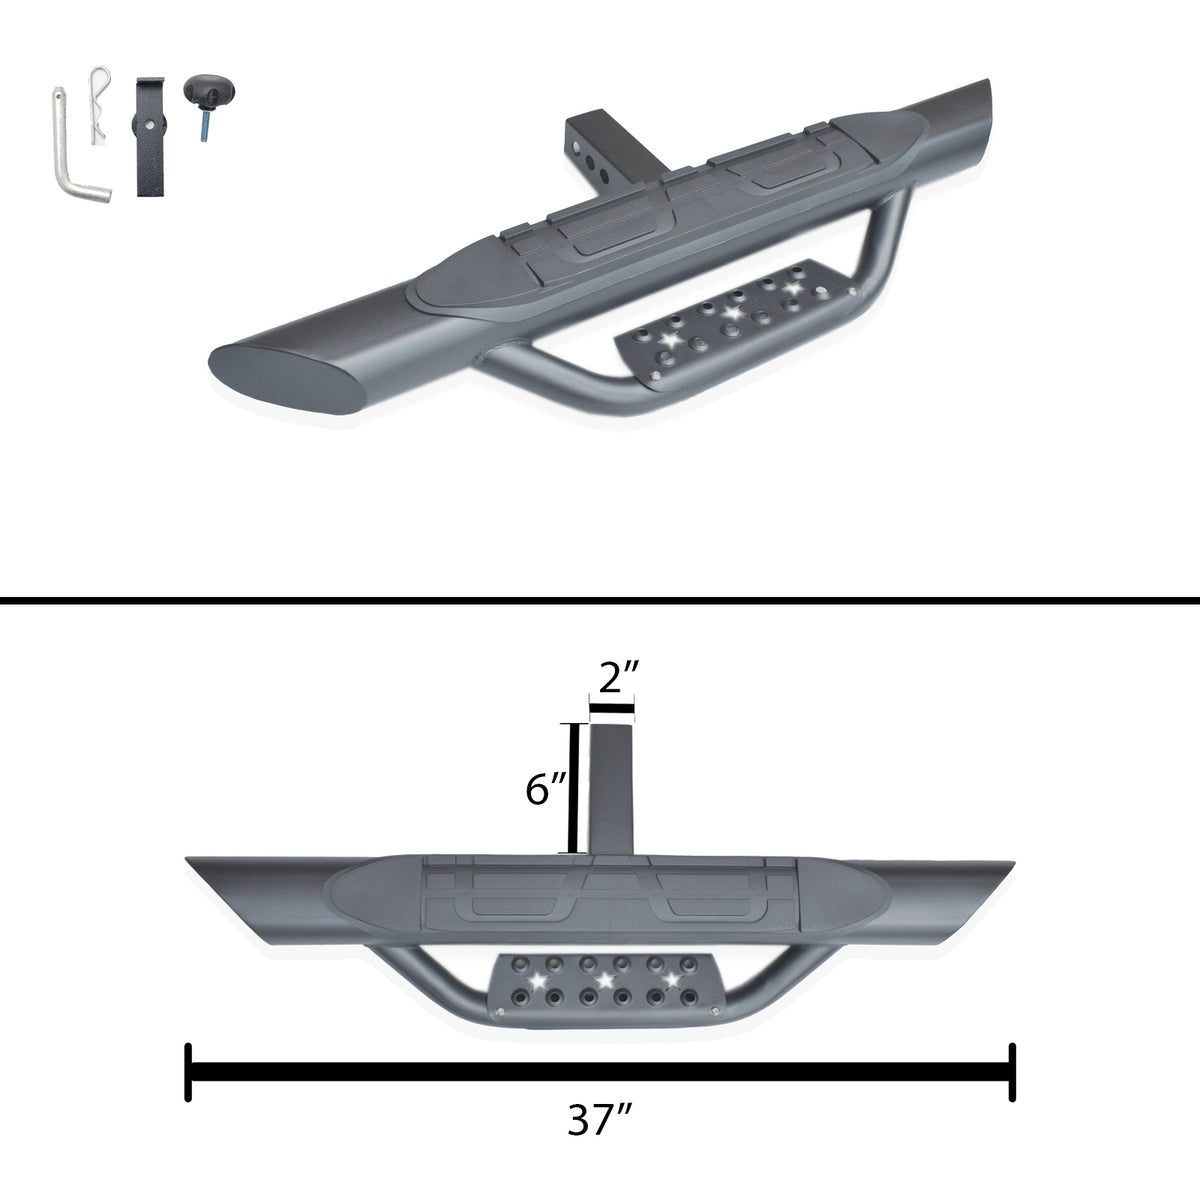 2" Hitch Receiver Accessories - 8117 Series 37" Hitch Step (Oval Design) - Broadfeet